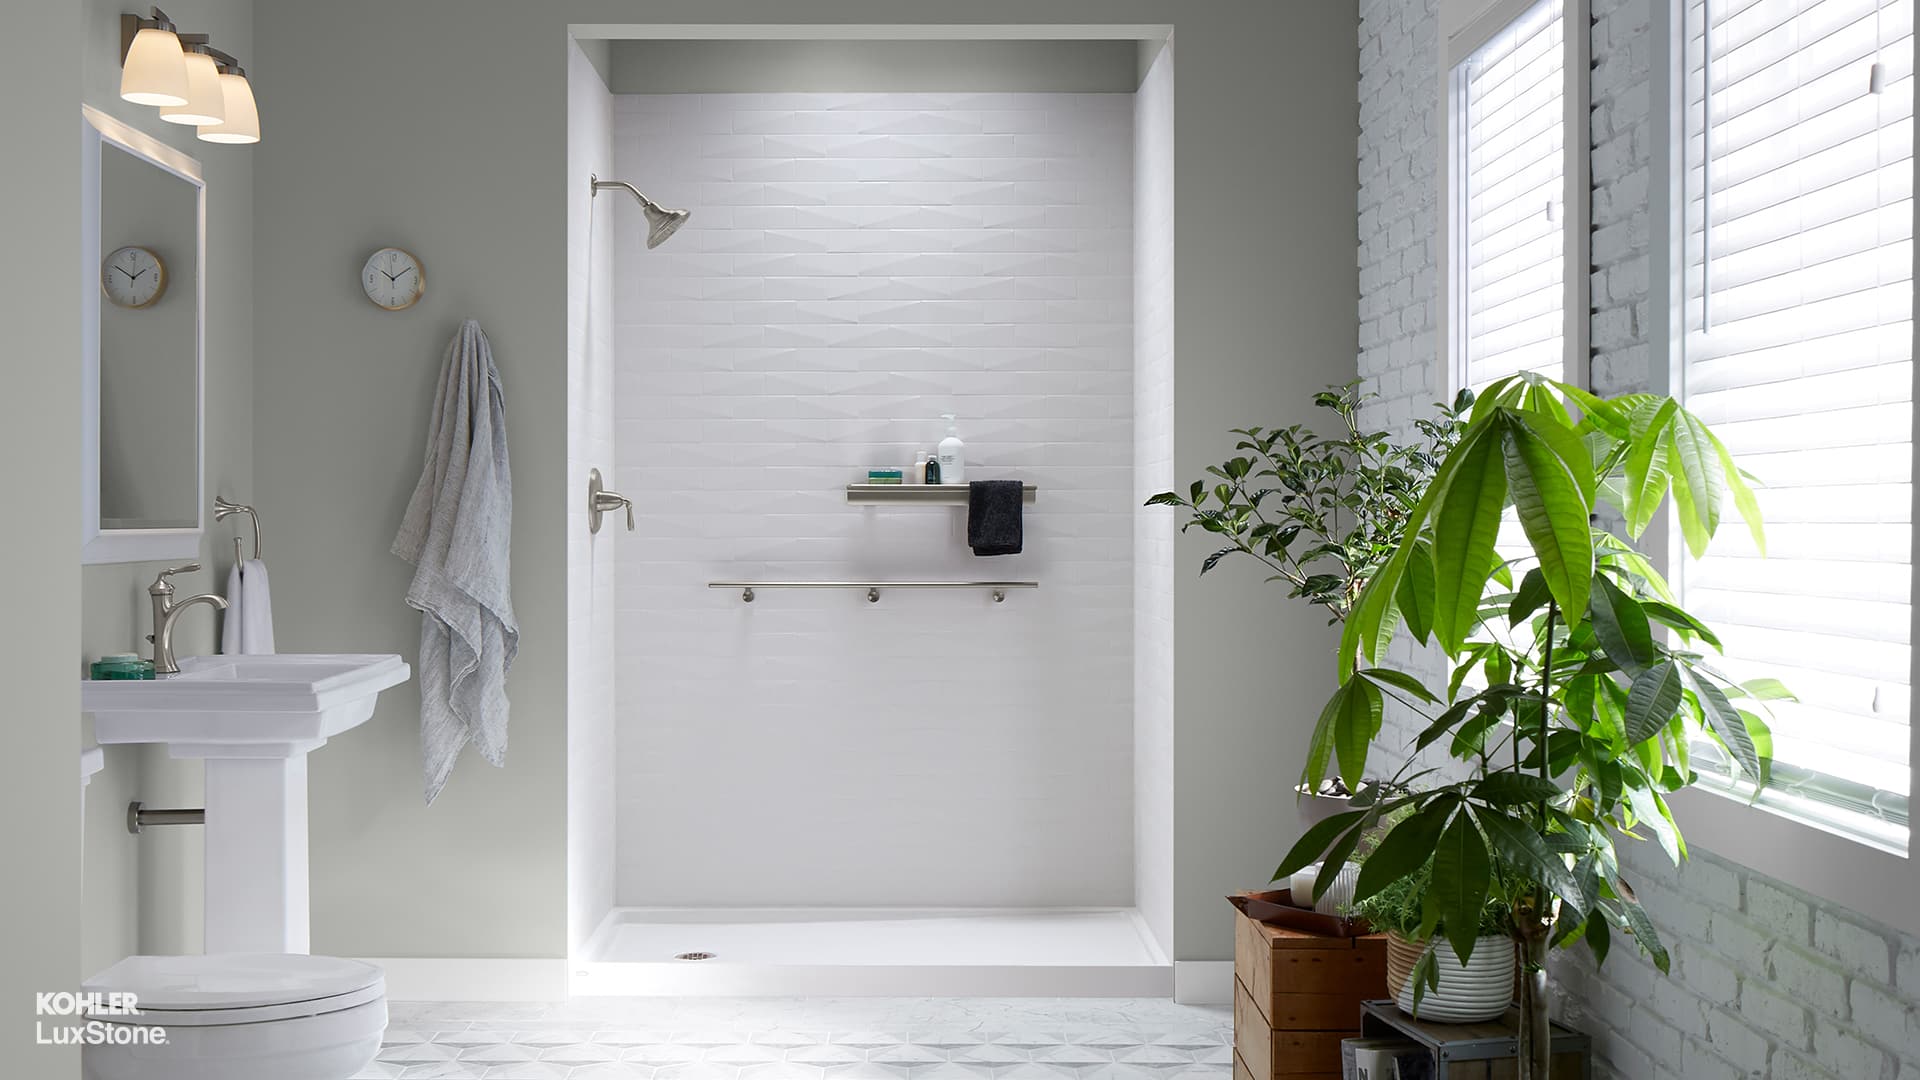 Download Test 6 Bathroom Styles Virtually With Zoom Kohler Luxstone Showers Blog